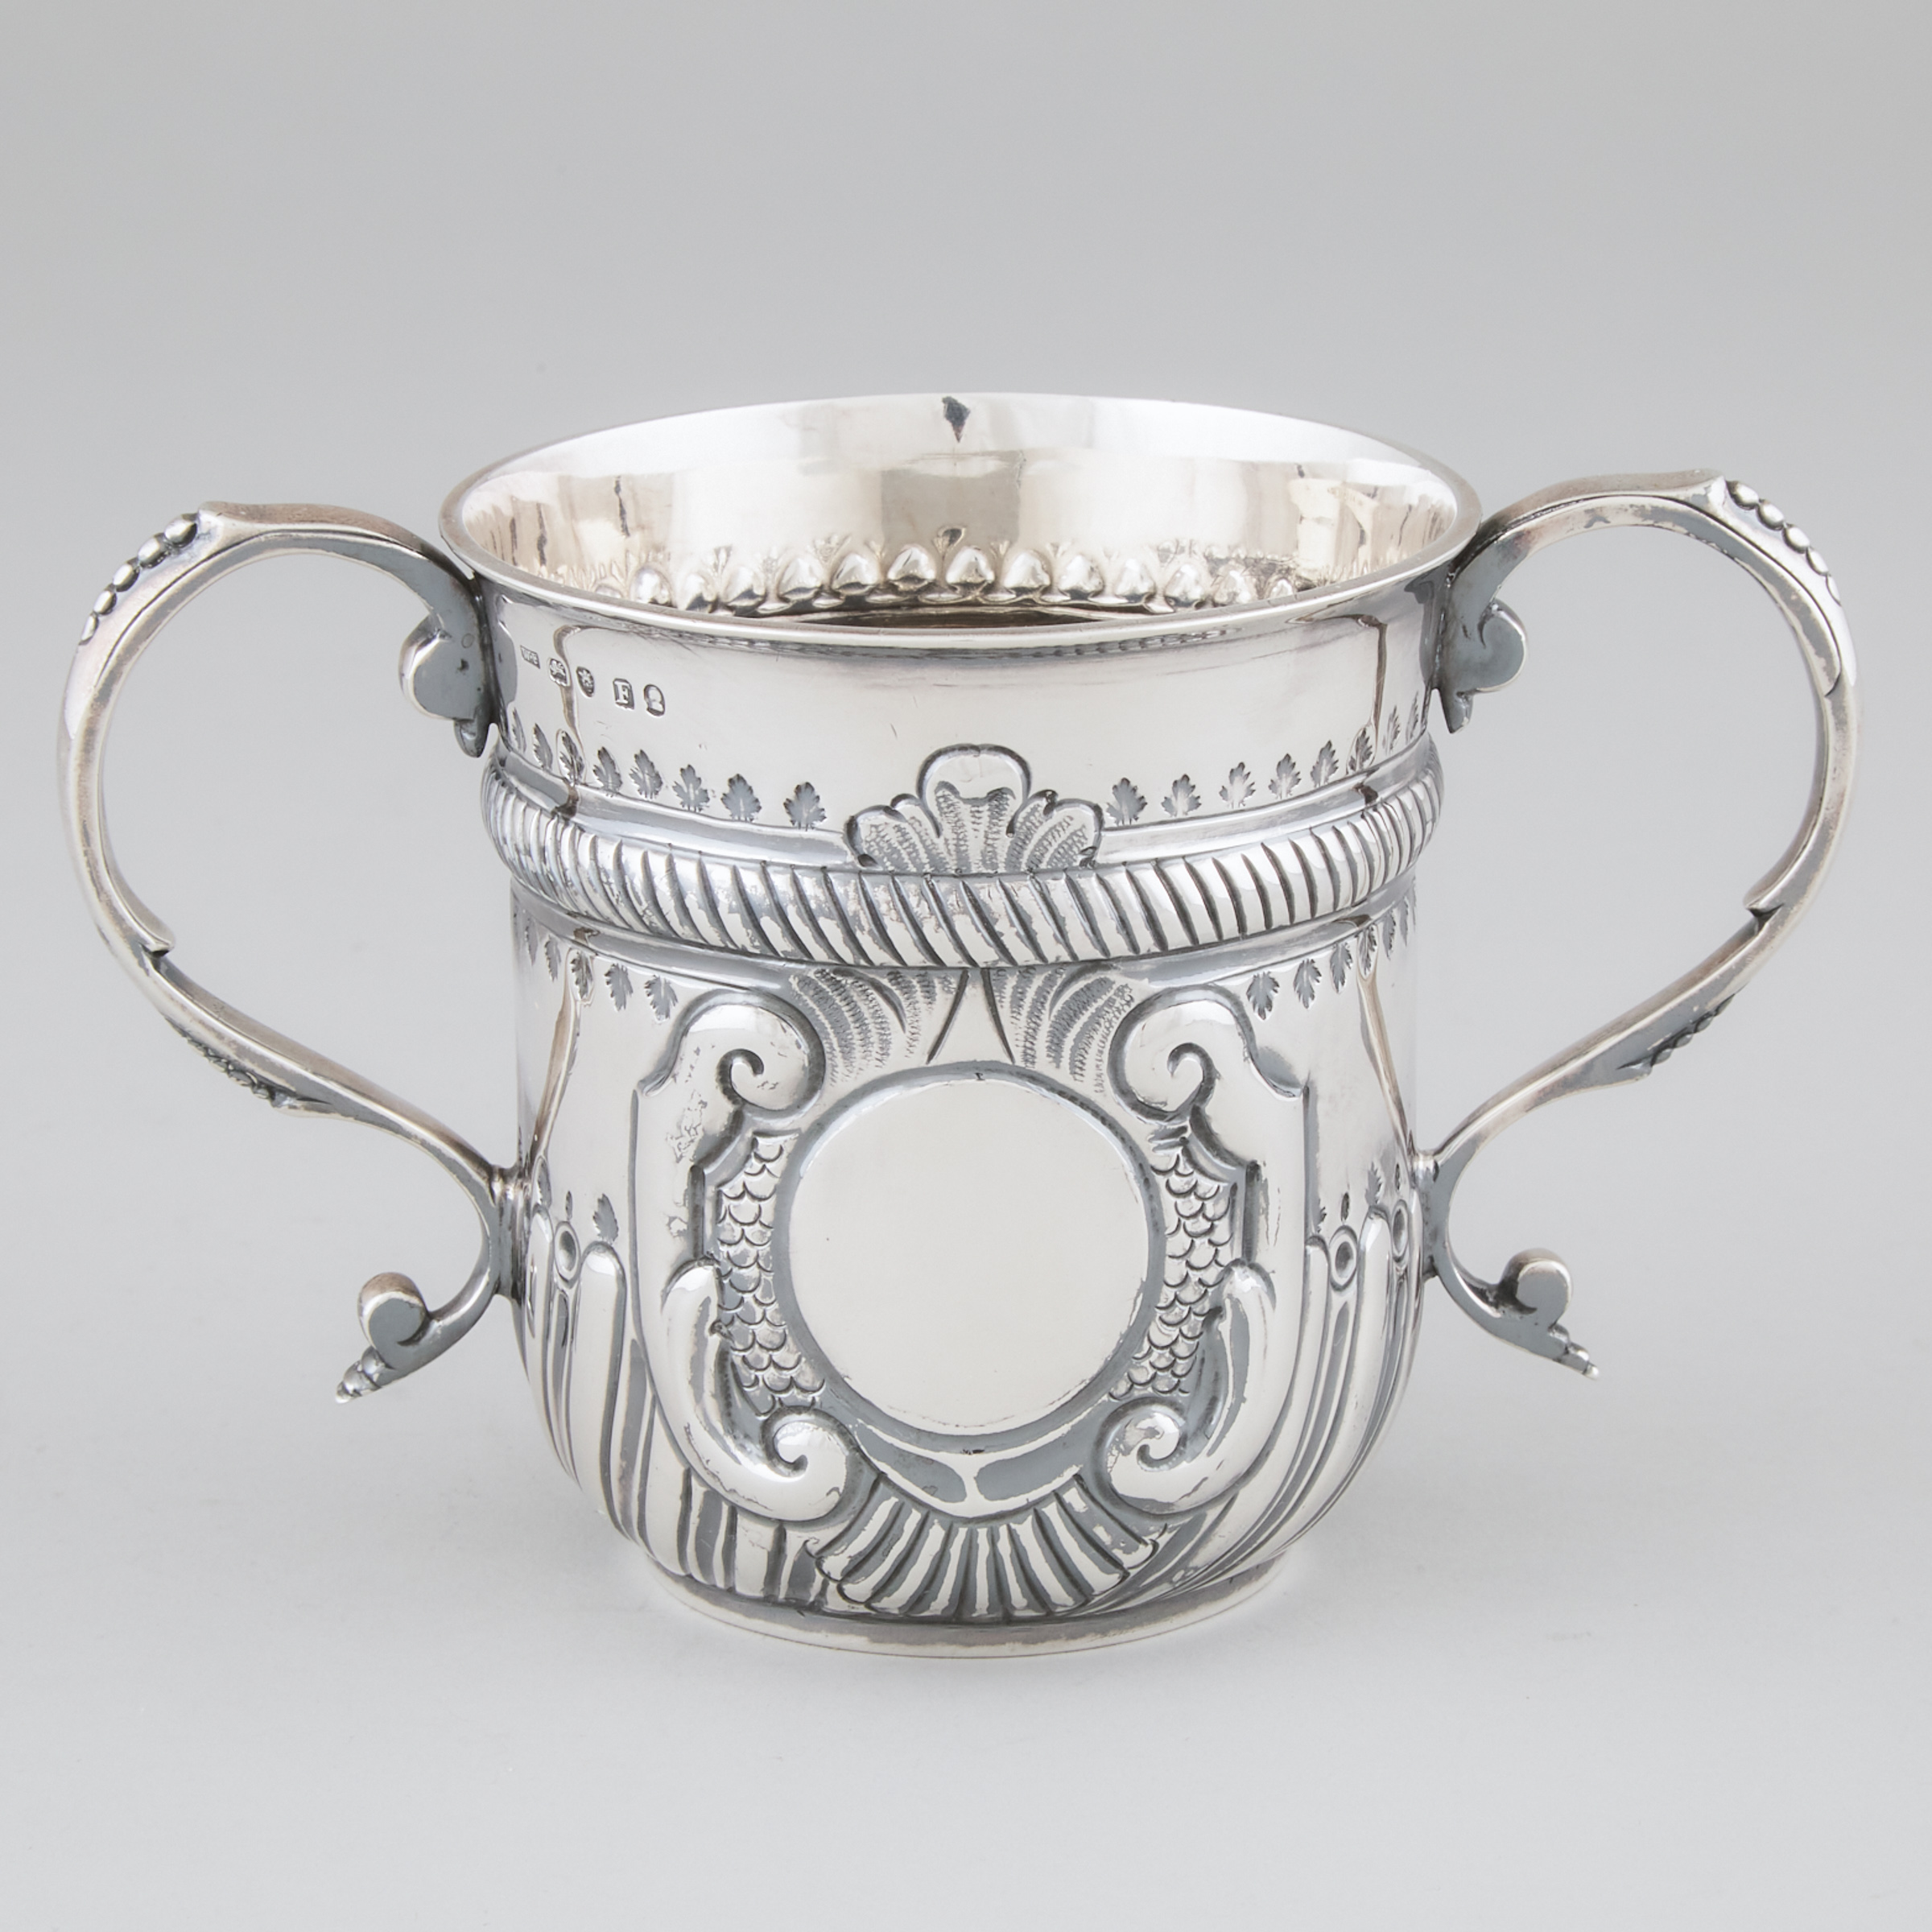 George III Silver Caudle Cup, William Frisbee, London, 1801